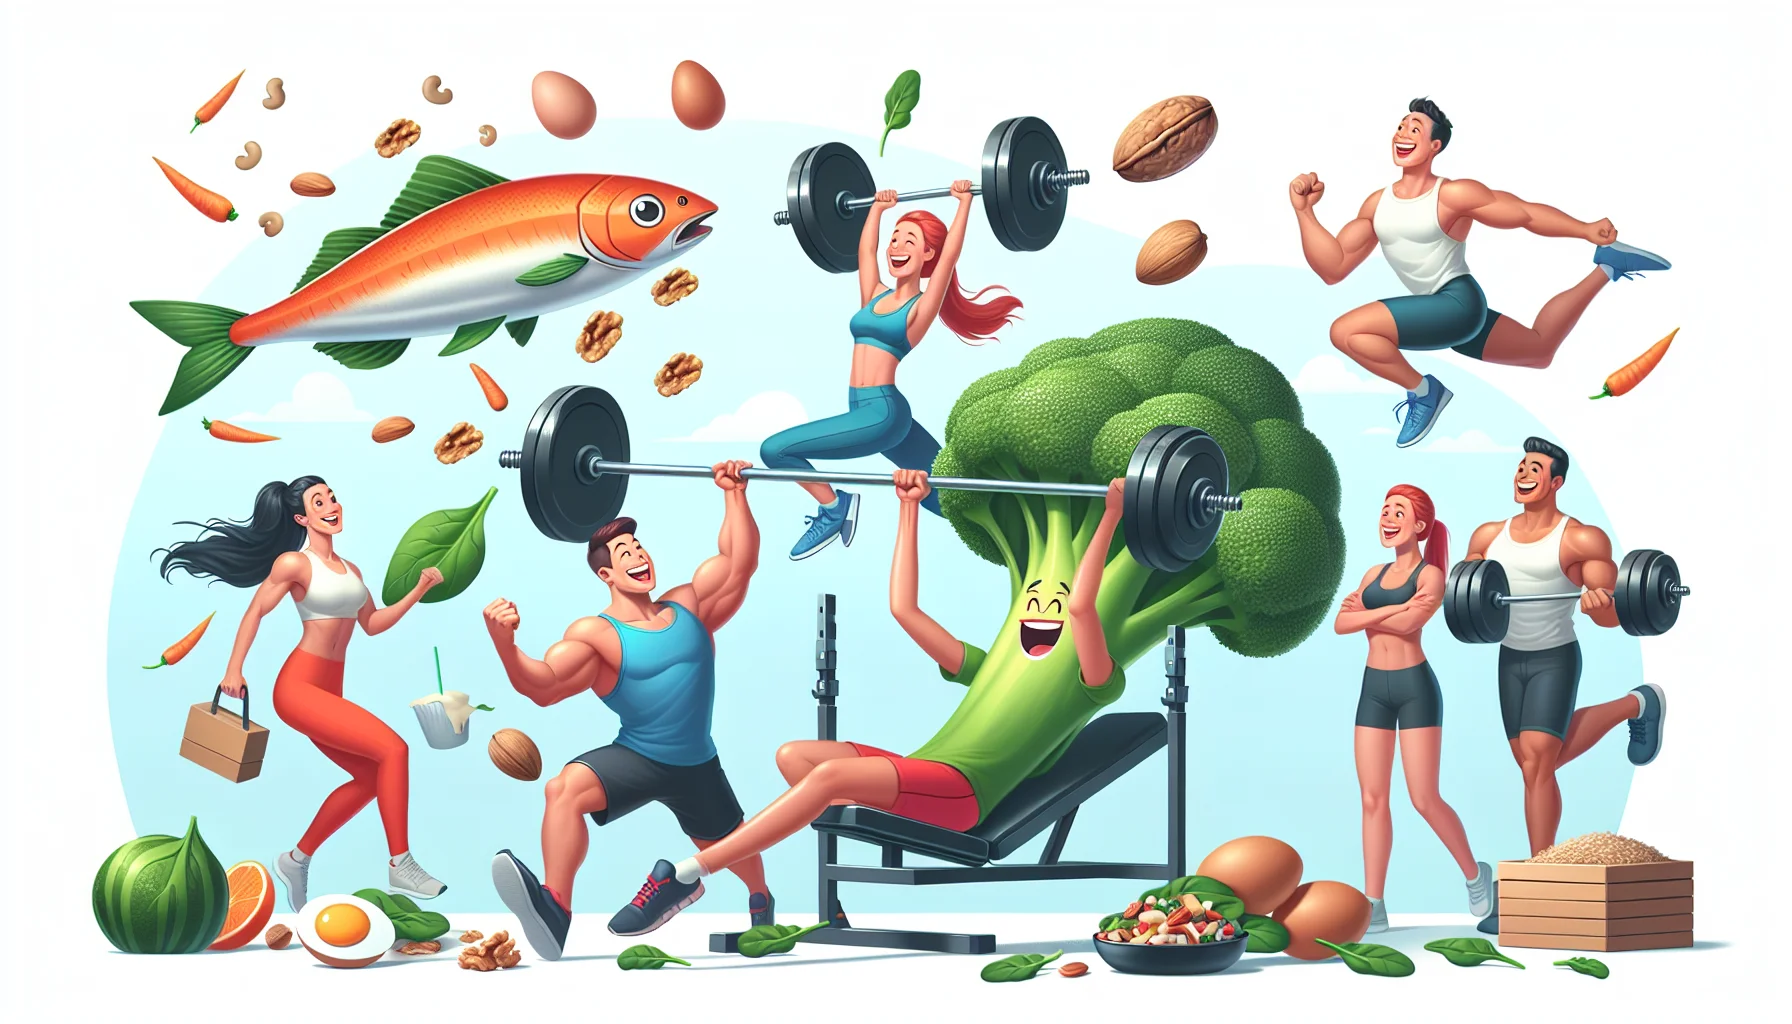 Produce a lively and humorous scene focused on fitness enthusiasts paying heed to diet tips to prevent hair loss. Let's visualize a health conscious scenario where fitness buffs of various descents and genders are involved in energetic actions like yoga, weightlifting, and running. They are cheerfully engaging with well-balanced food items known for promoting hair health such as spinach, nuts, and eggs, incorporated in creative ways. Maybe one is bench pressing a barbell made of giant broccoli, another is running after a flying salmon, or someone is doing yoga balancing a plate of nutritious food on their head.